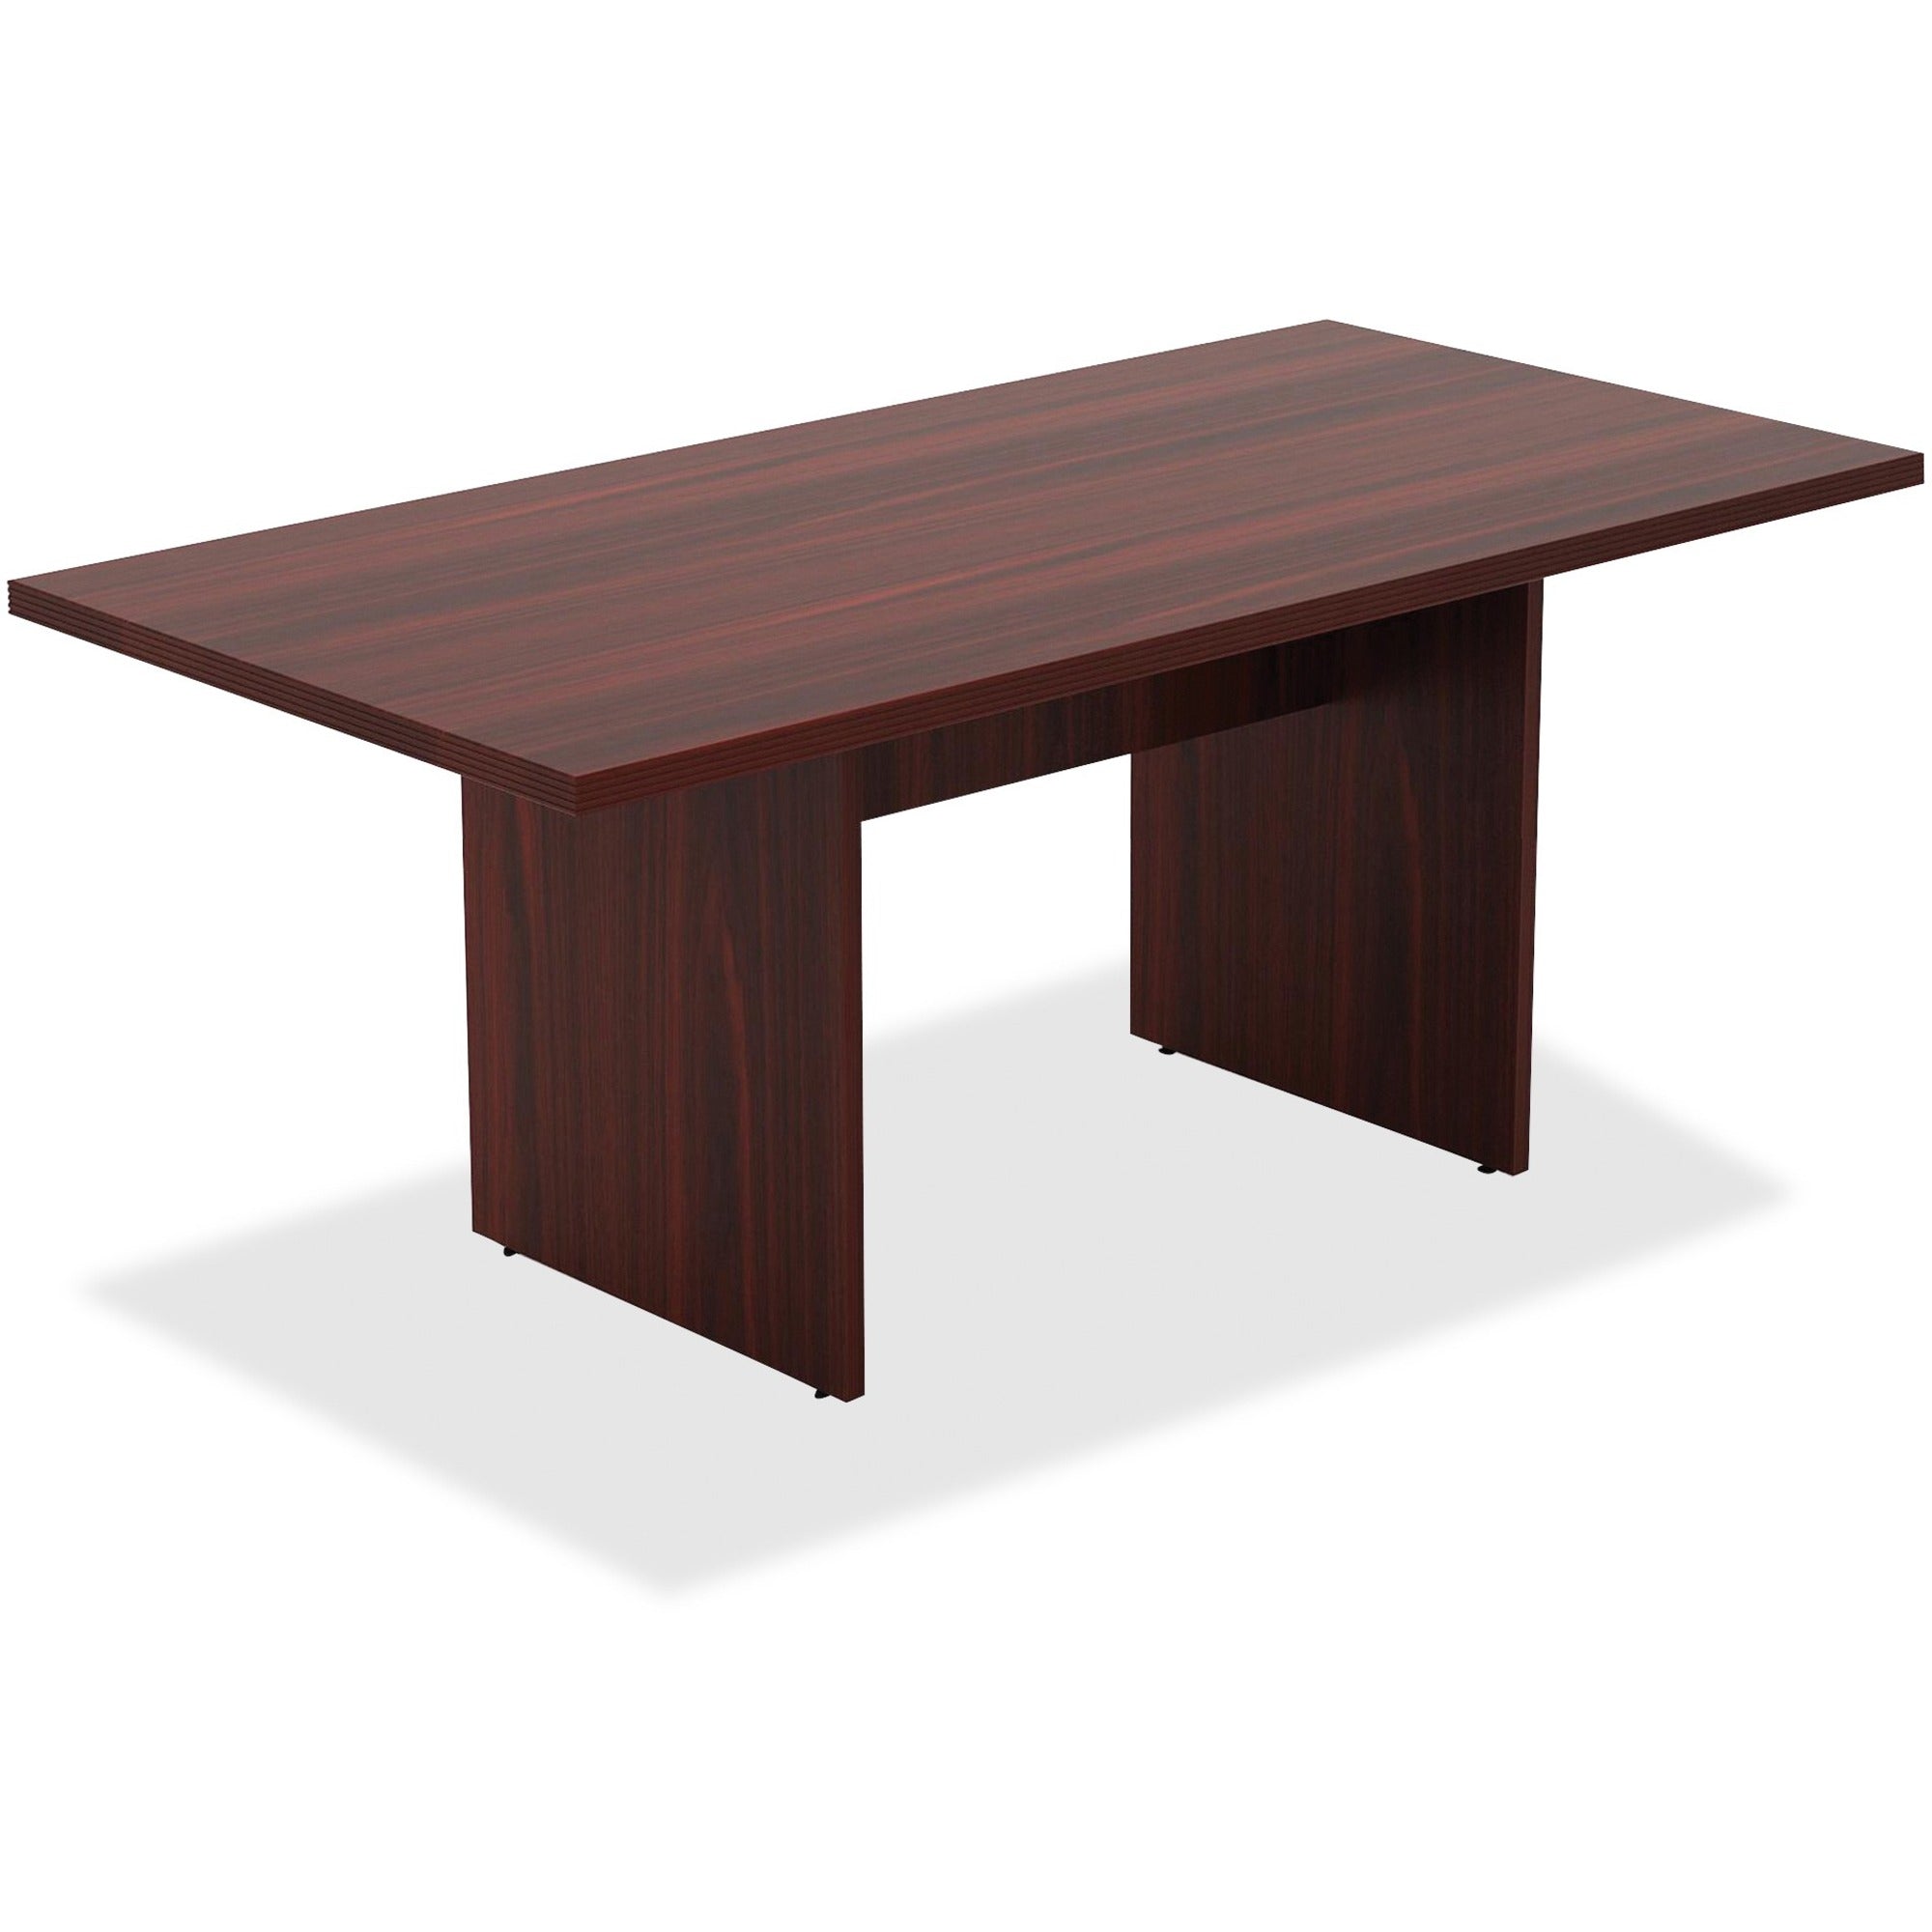 Lorell Chateau Series 6' Rectangular Table - 70.9" x 35.4"30" Table, 1.5" Table Top - Reeded Edge - Material: P2 Particleboard - Finish: Mahogany Laminate - Durable, Modesty Panel - For Meeting - 